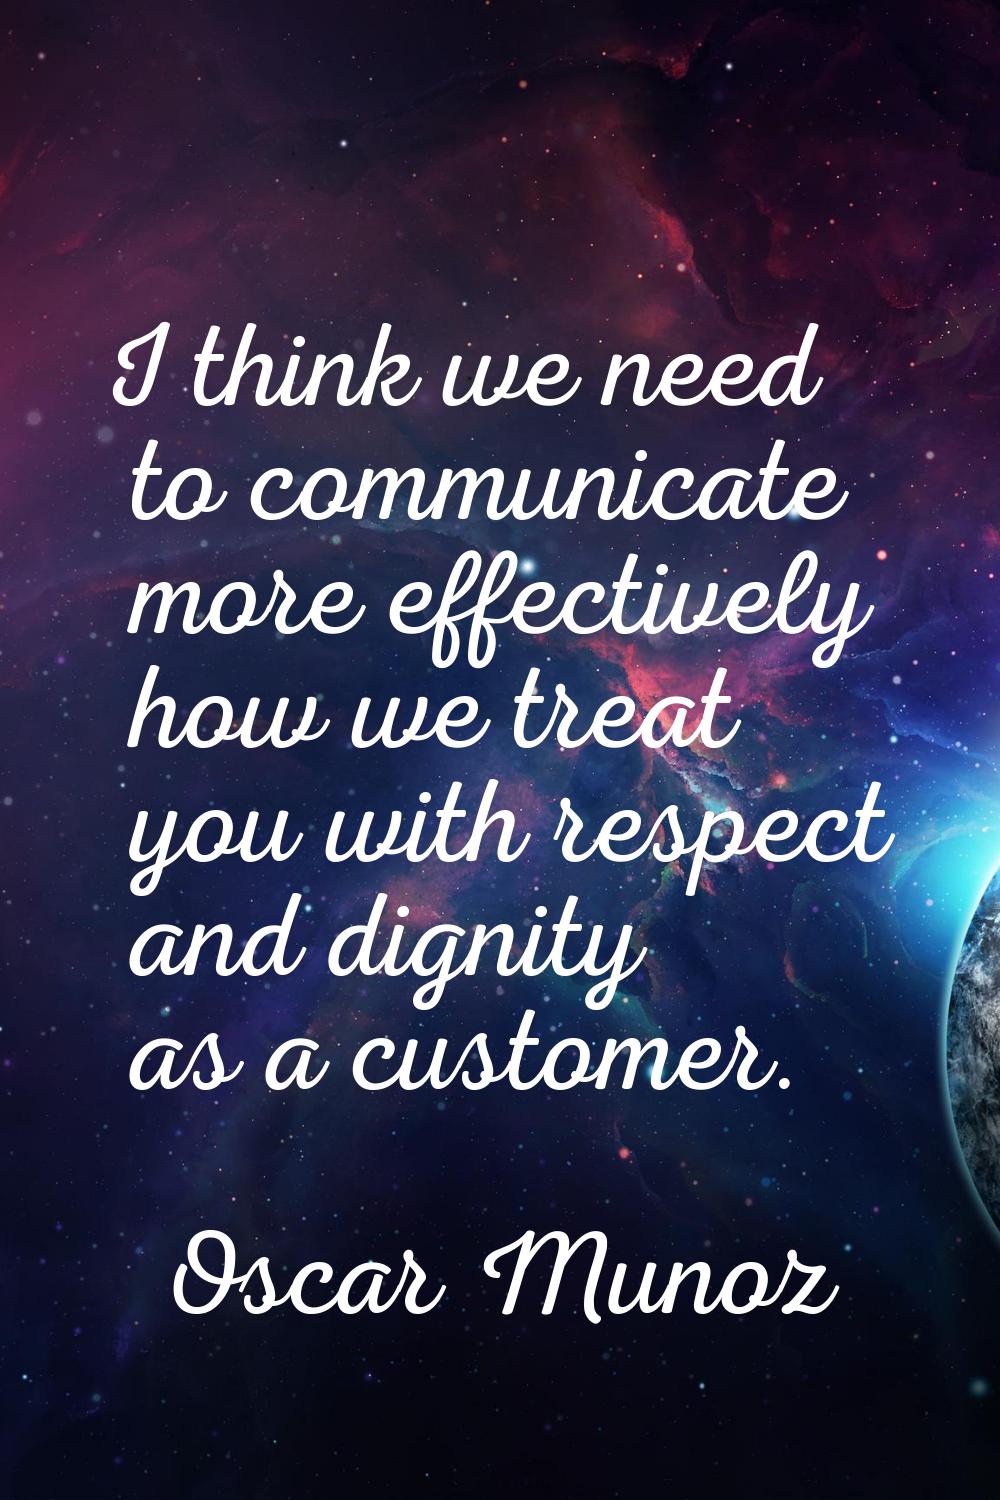 I think we need to communicate more effectively how we treat you with respect and dignity as a cust